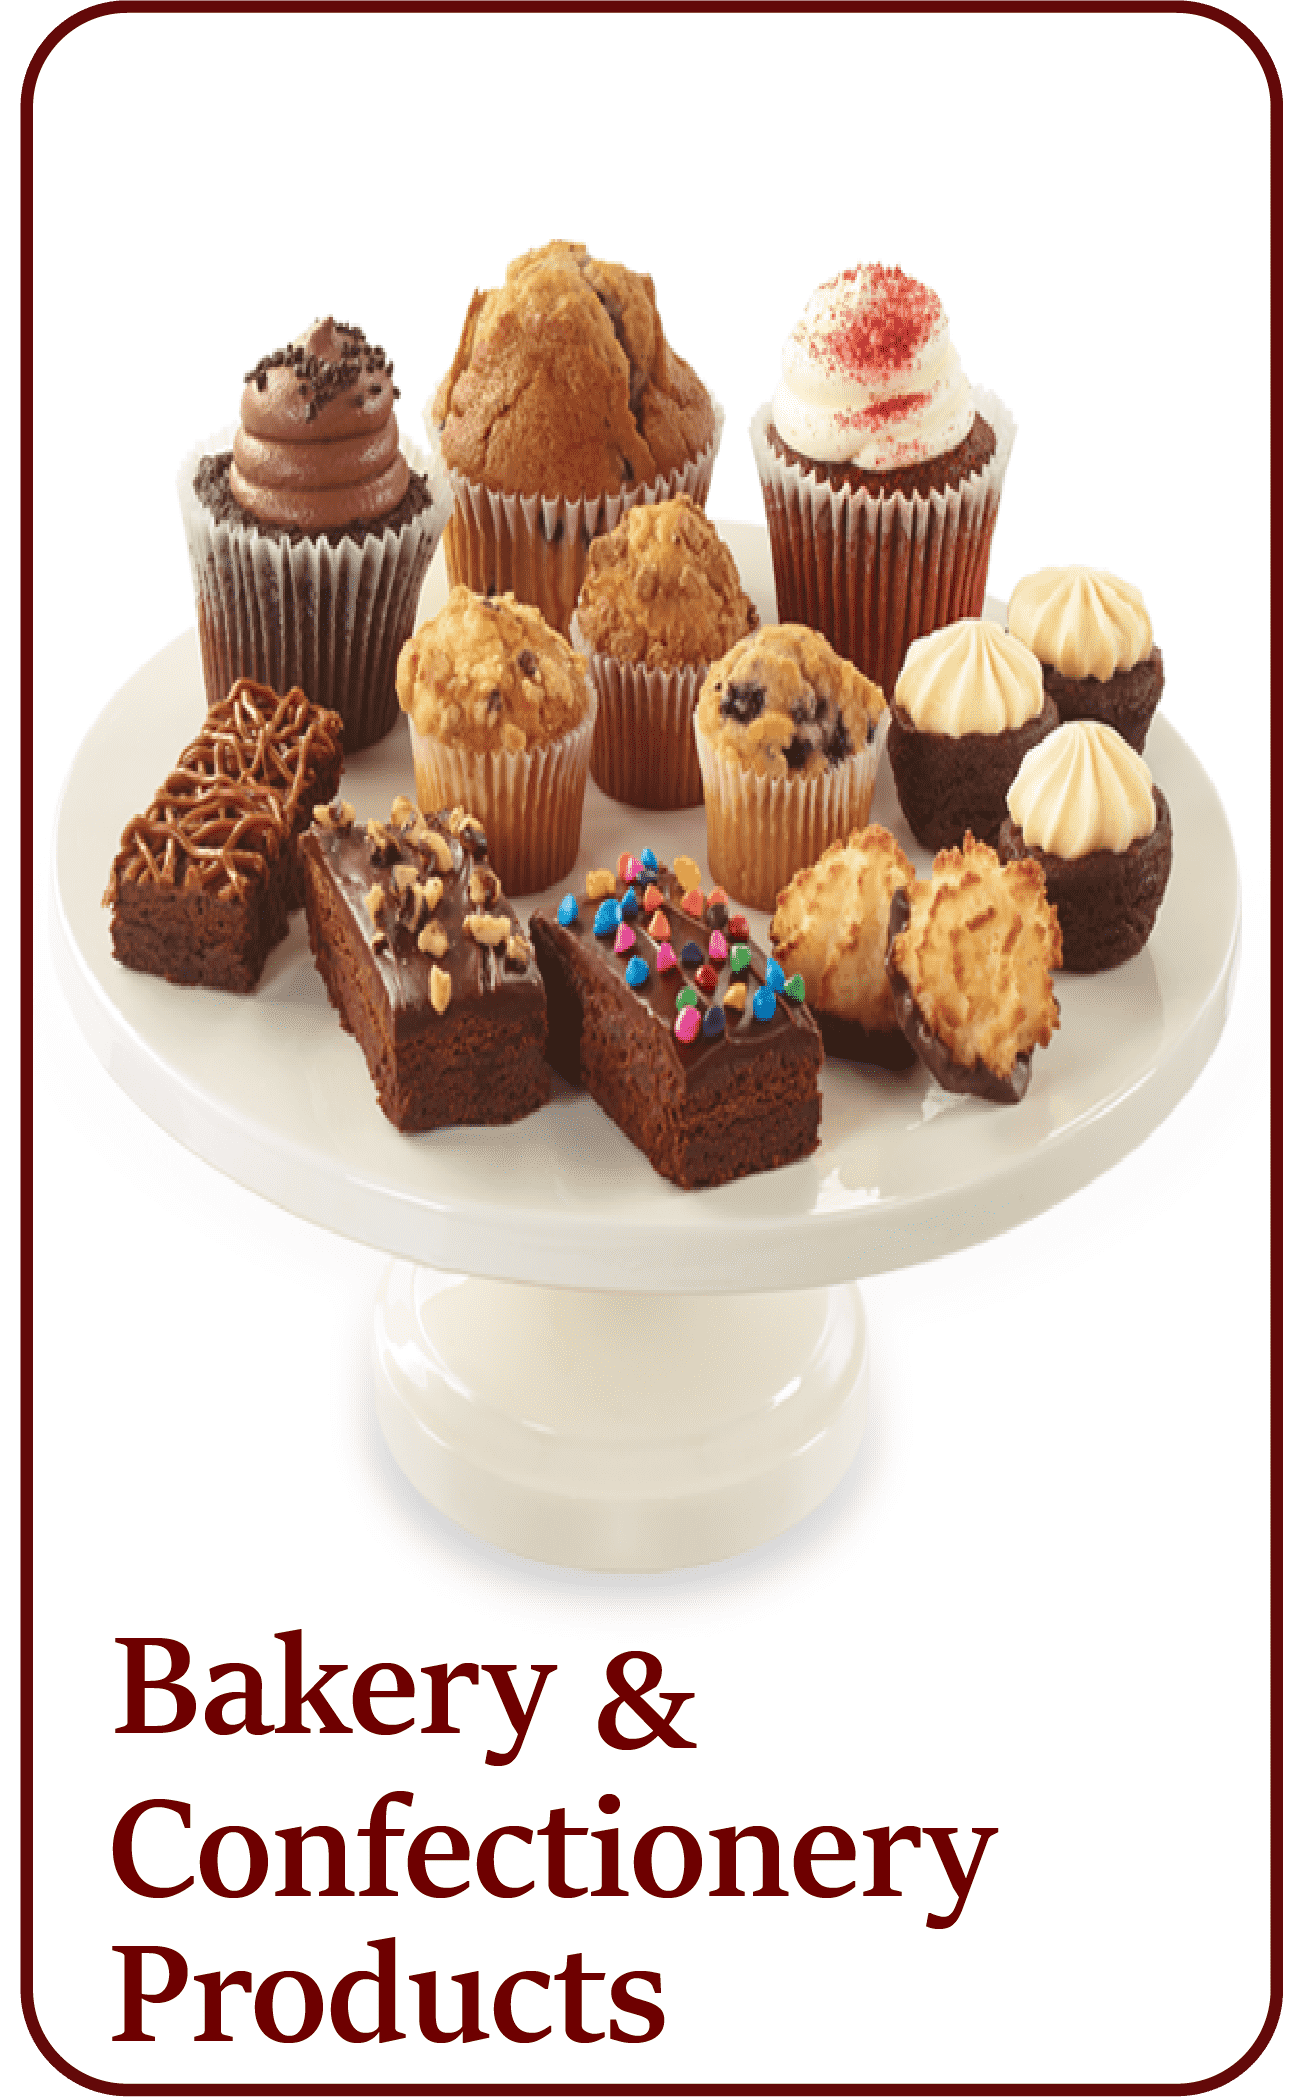  Bakery & Confectionery Products